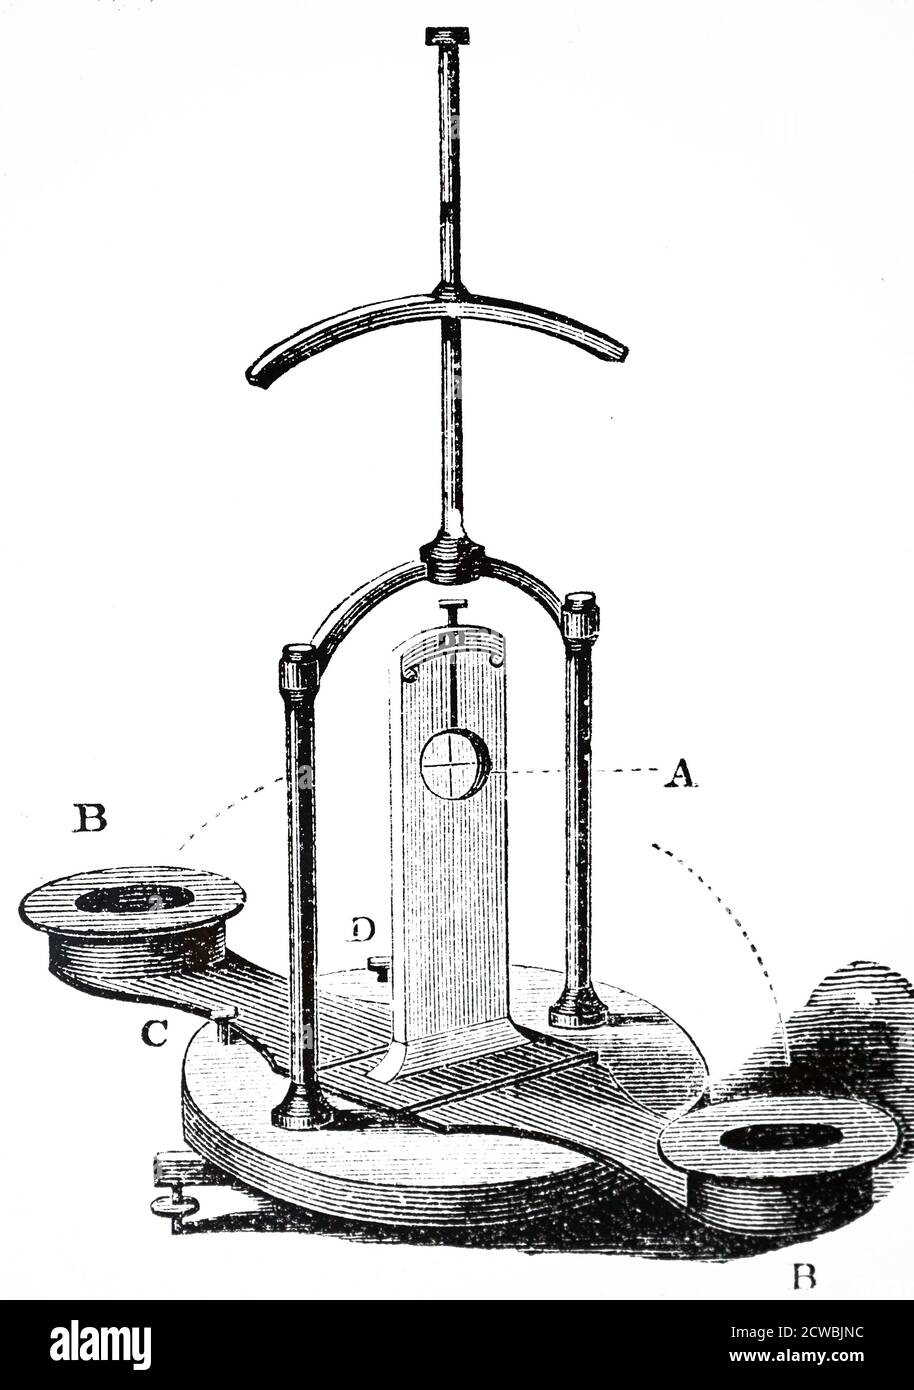 Engraving depicting Lord Kelvin's mirror galvanometer showing the mirror A with a small magnet attached. BB are bobbins would with fine copper wire through which current to be measured is passed. Stock Photo